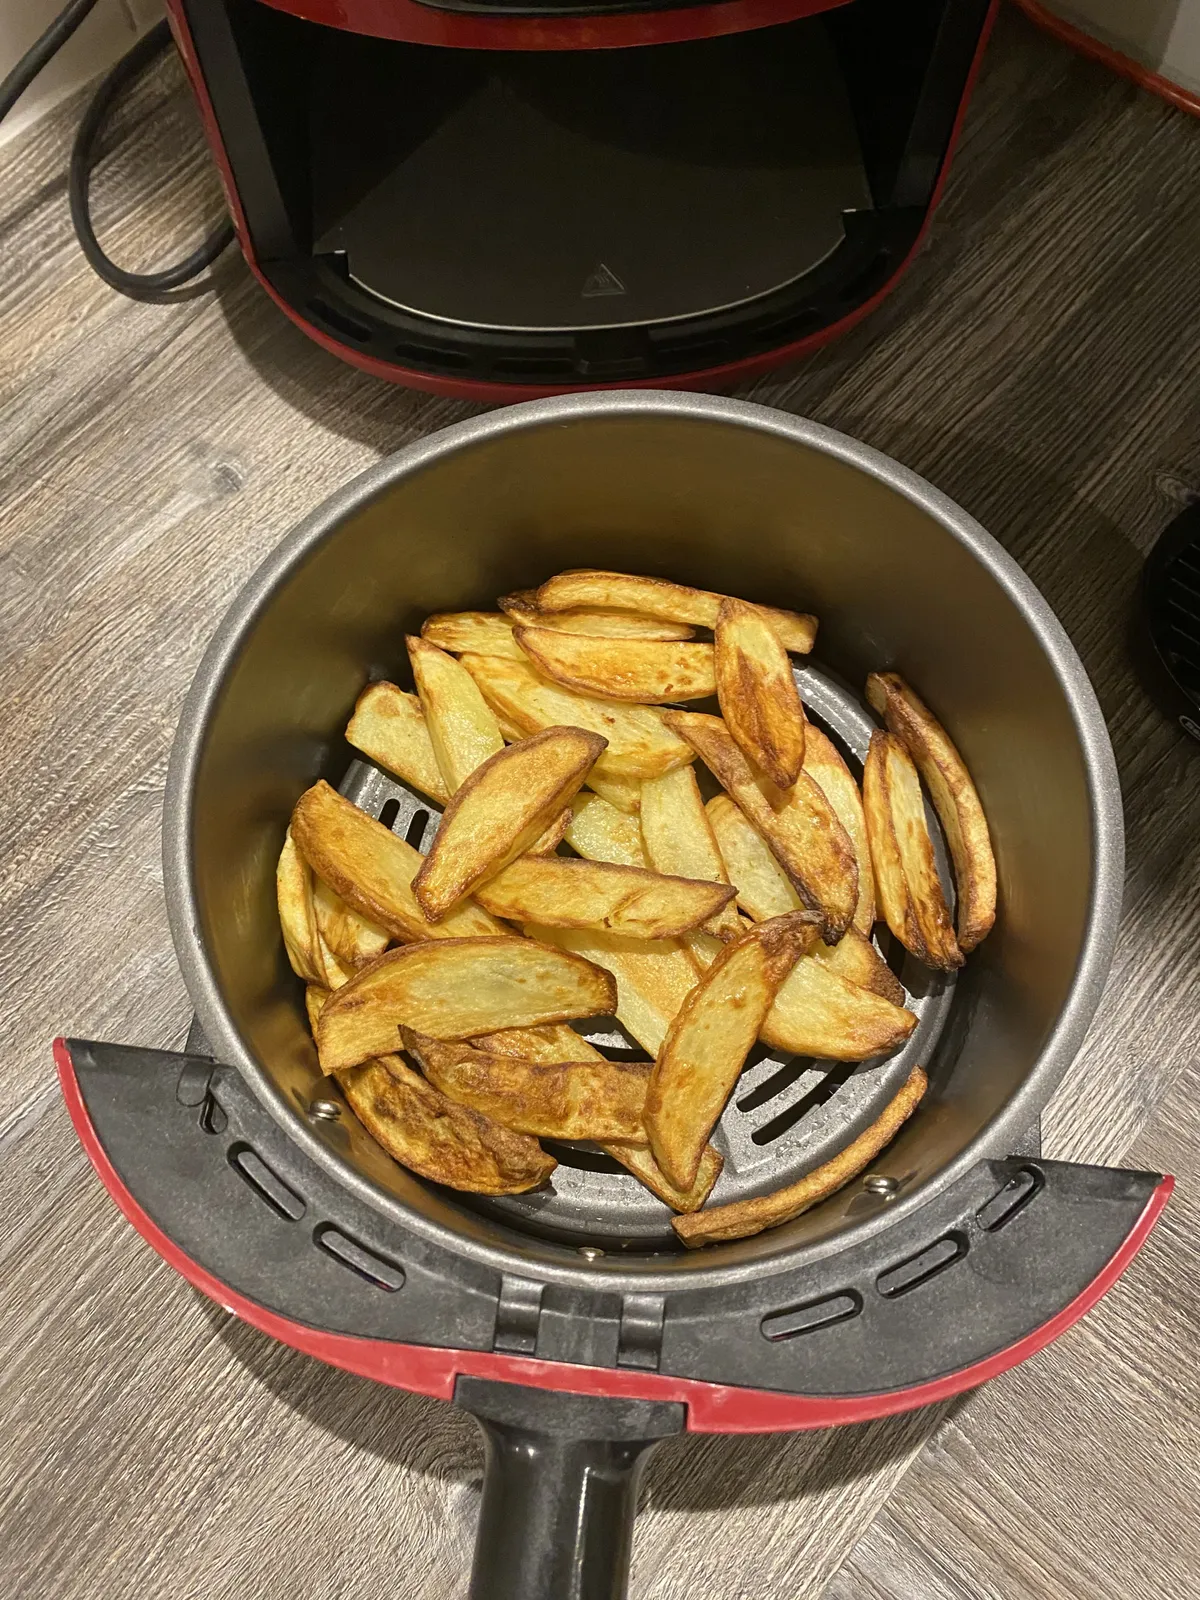 Karaca Air Pro Cook cooked chips